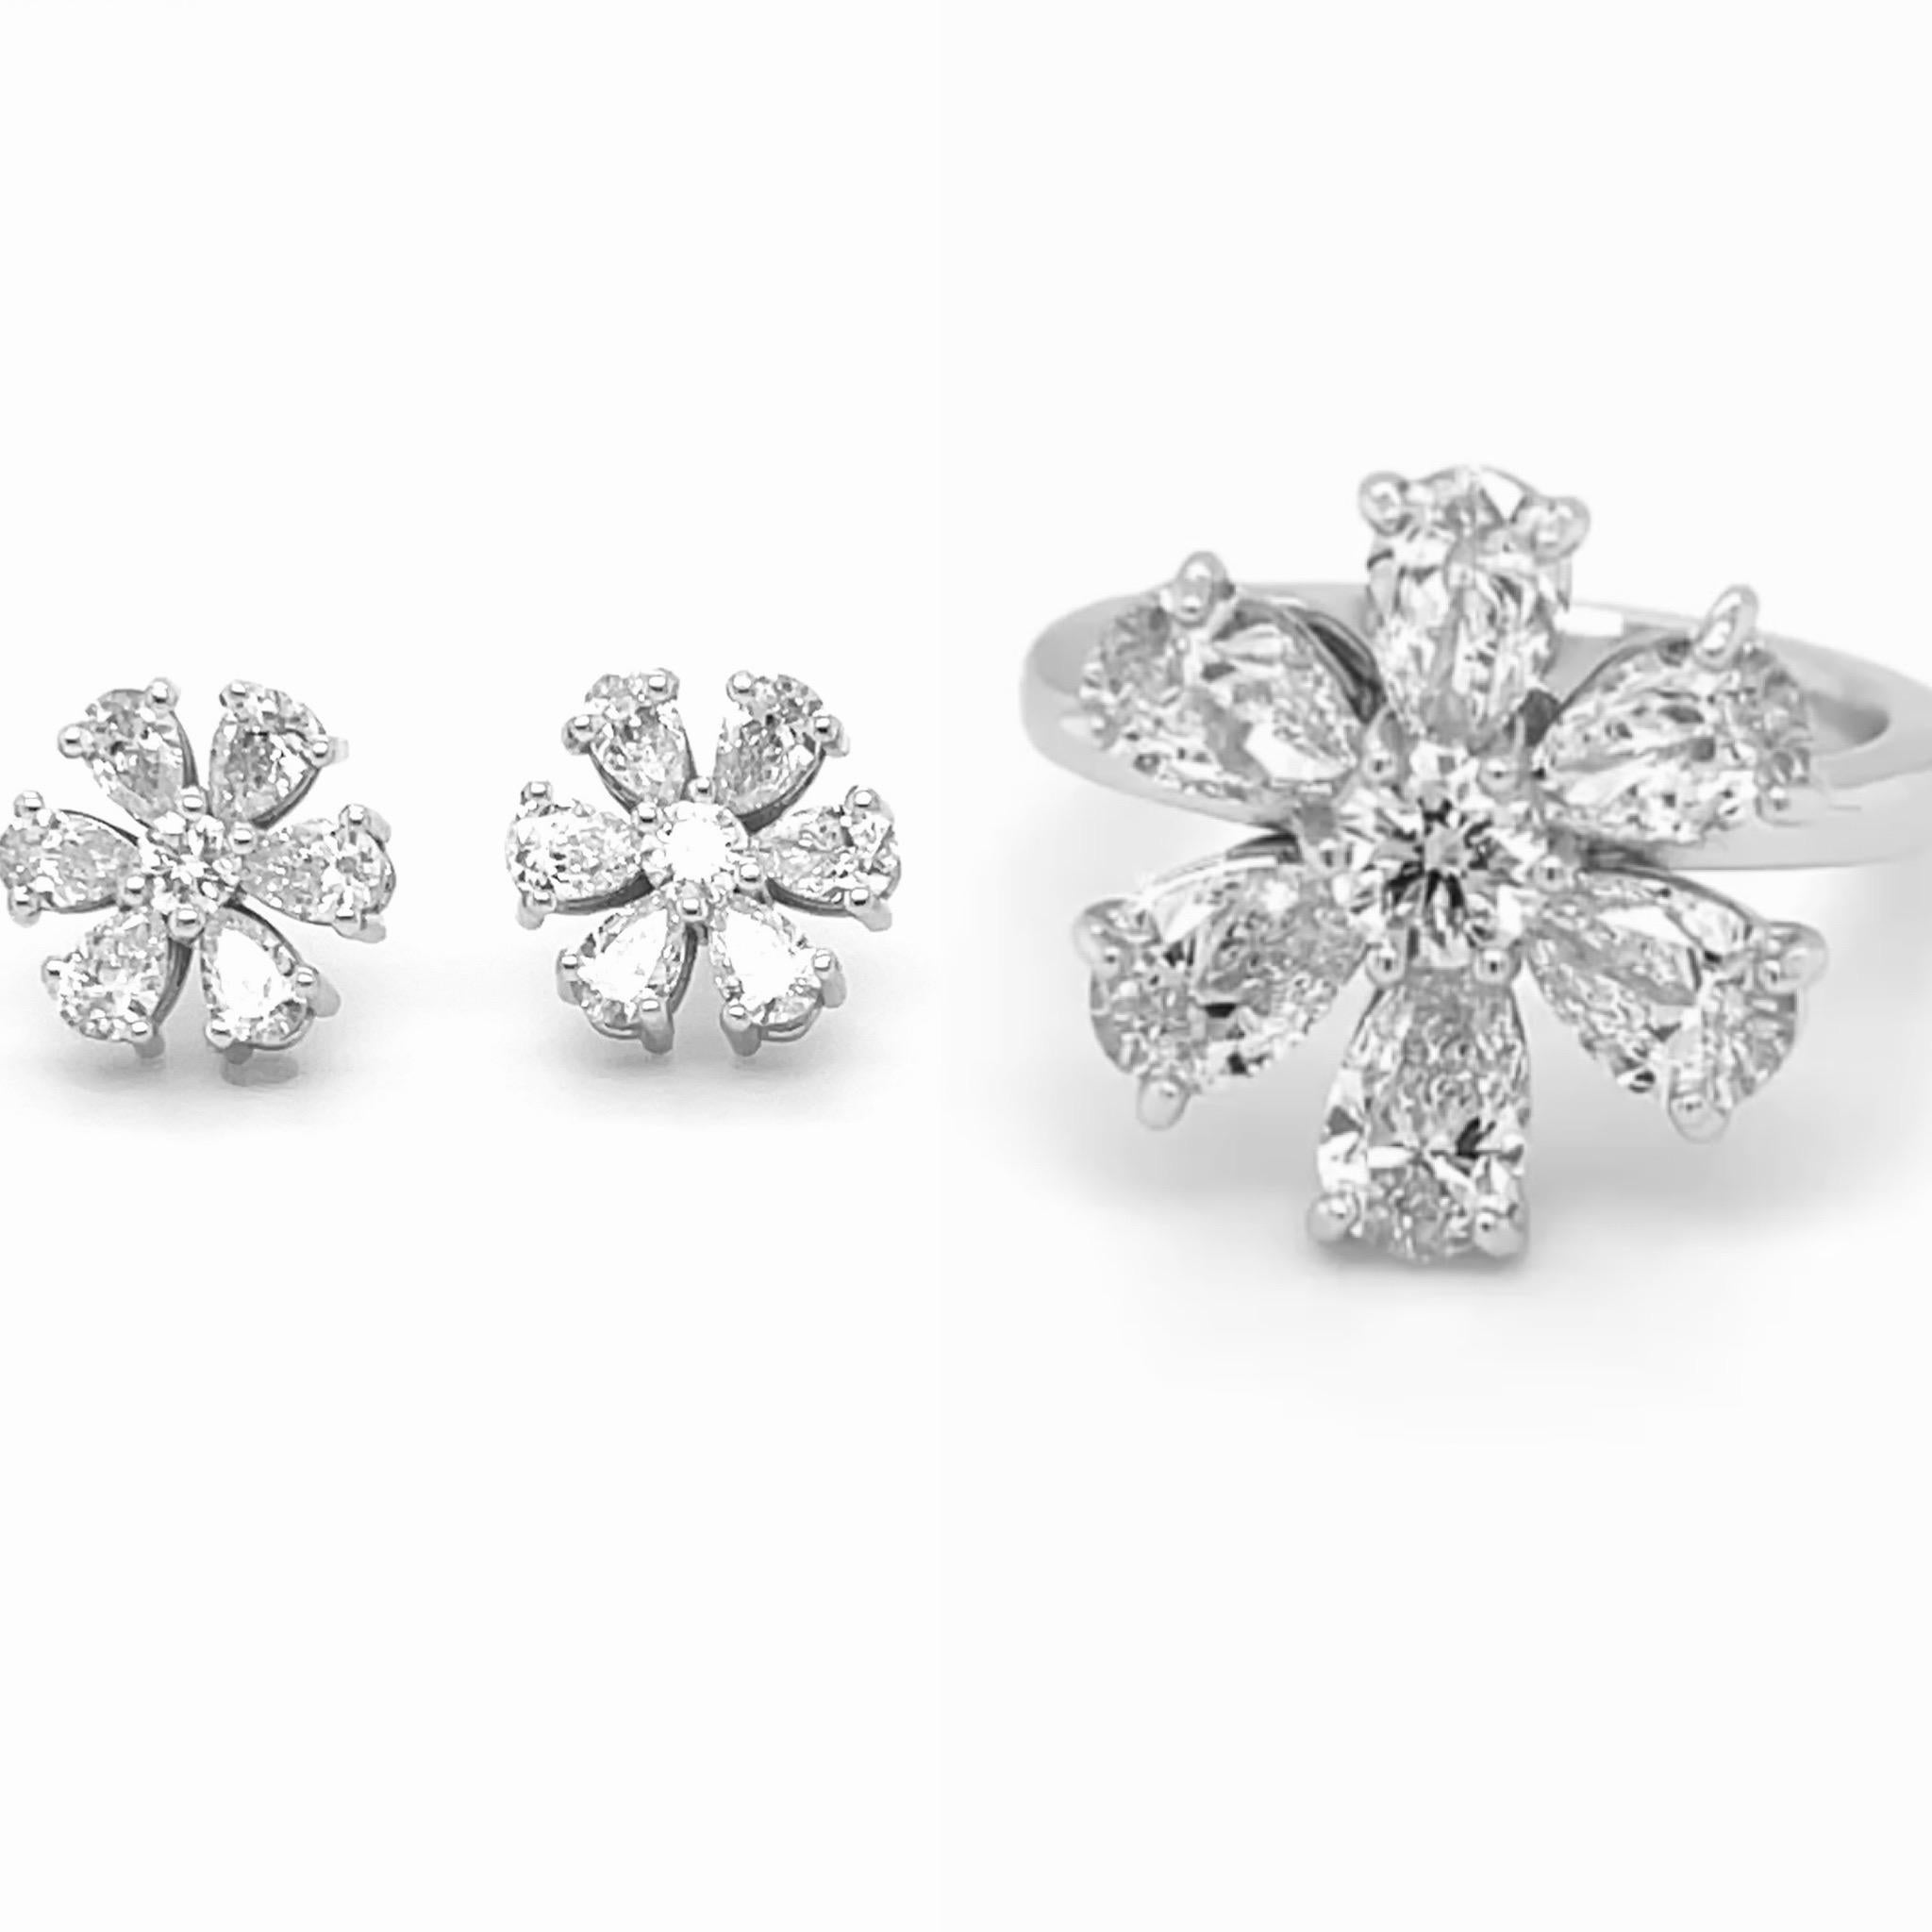 Diamond Pear Shape and Round Flower Ring and Earrings Set 4.12 Carats GIA Certified

RING

Pear Shape weighs 0.40ct. D Color  VS1 Clarity
With GIA Certificate # 7456648146

Pear Shape weighs 0.39ct. E Color  VS2 Clarity
With GIA Certificate #